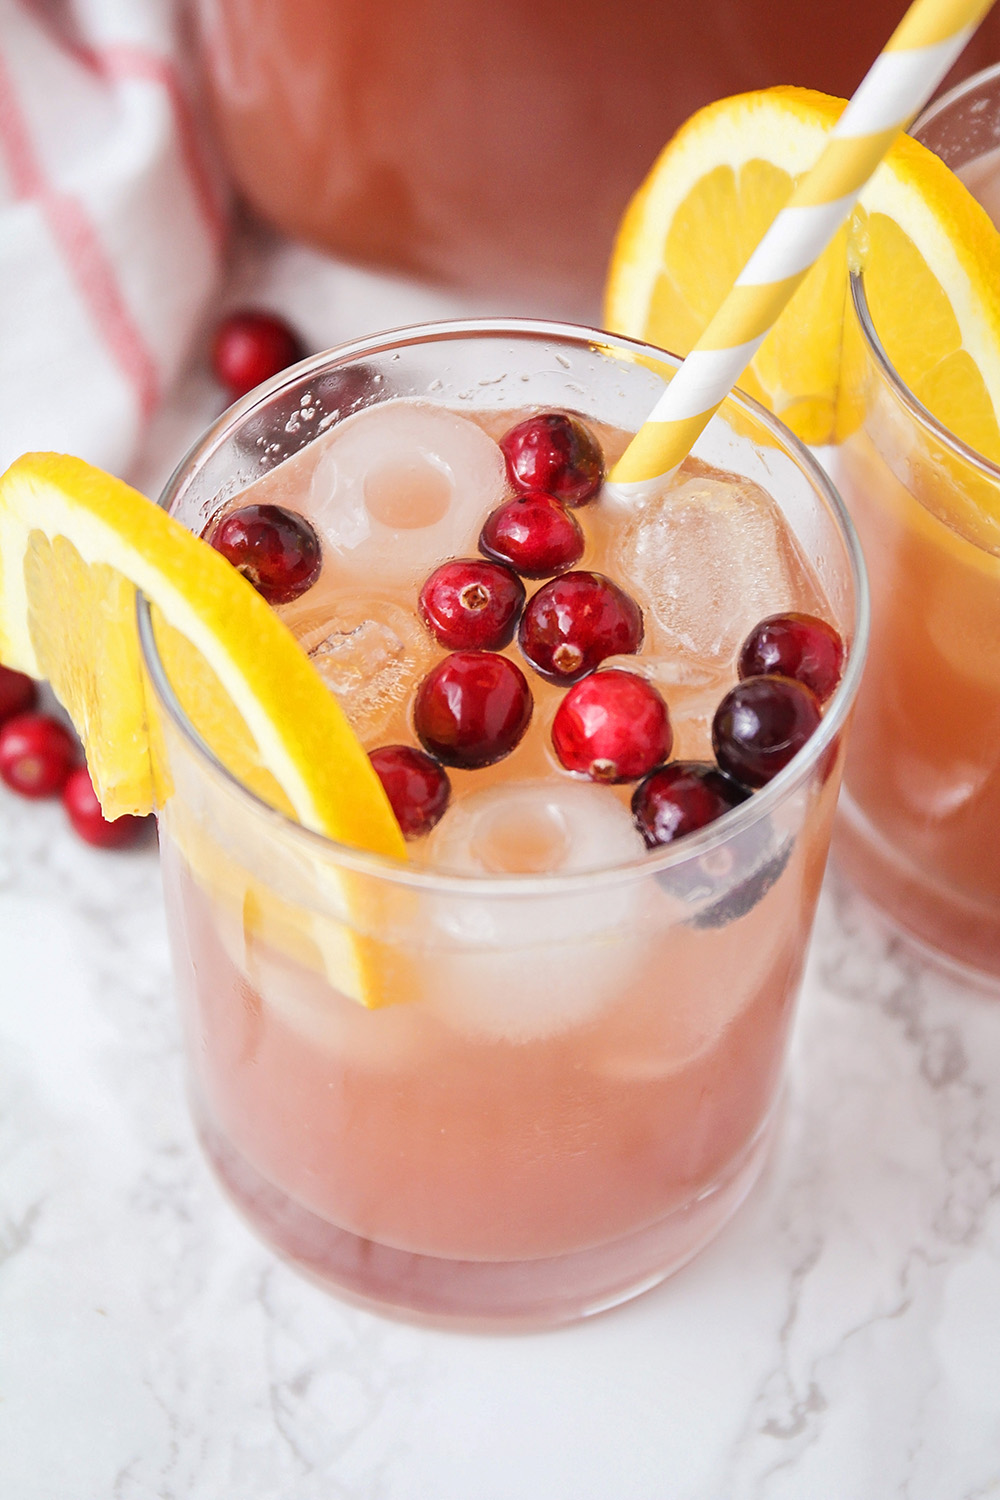 This simple and delicious holiday punch is so refreshing, and so easy to make!